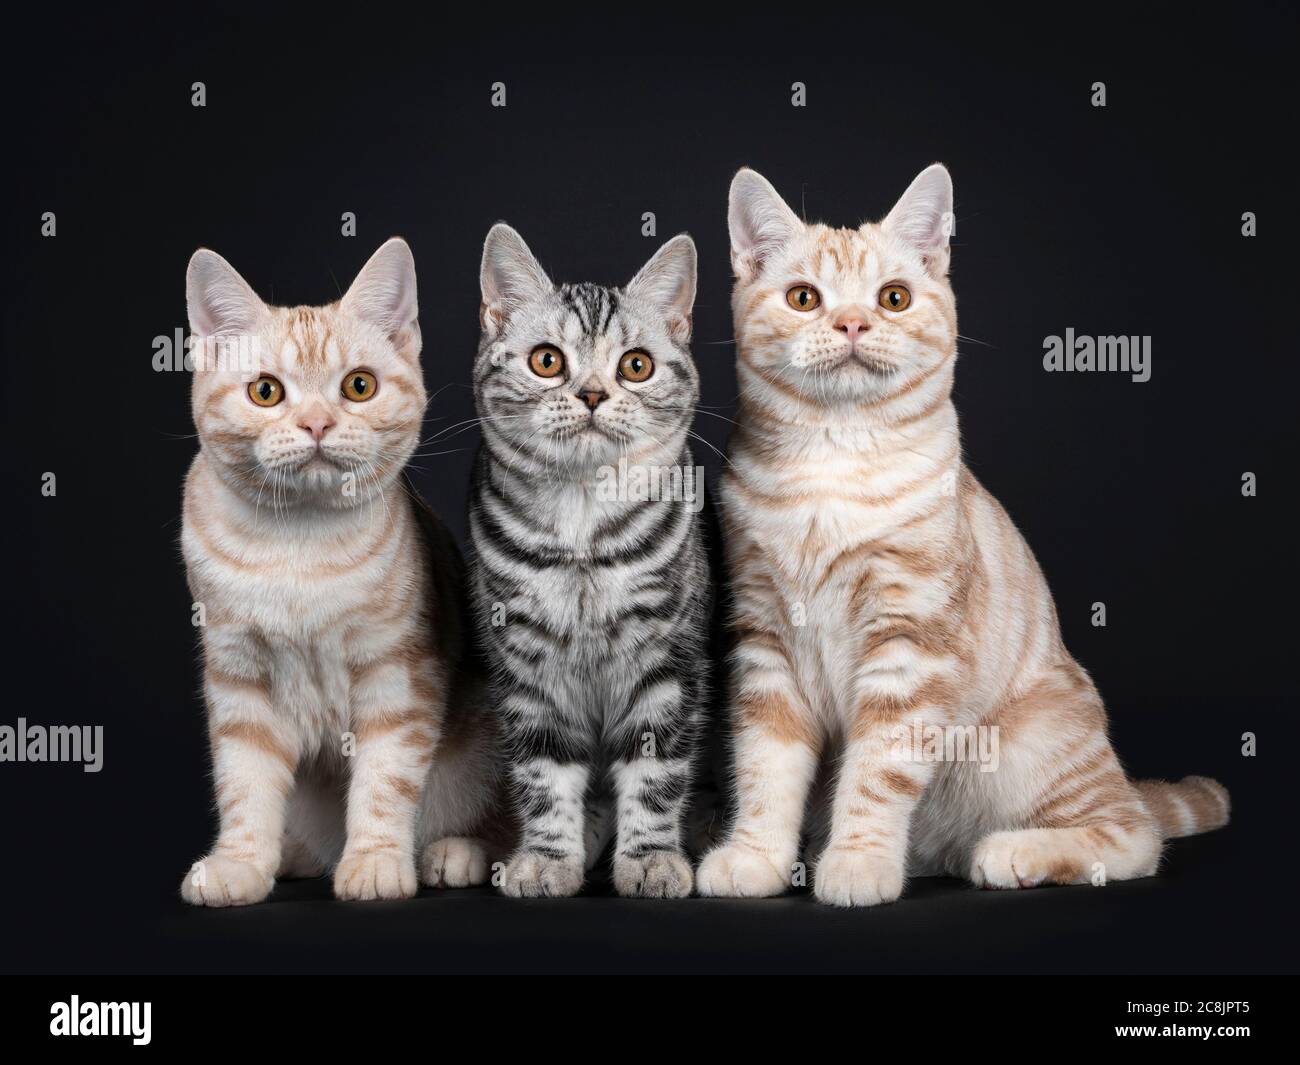 Row of three kittens sitting beside each other. All looking towards camera with orange eyes. Isolated on black background. Stock Photo